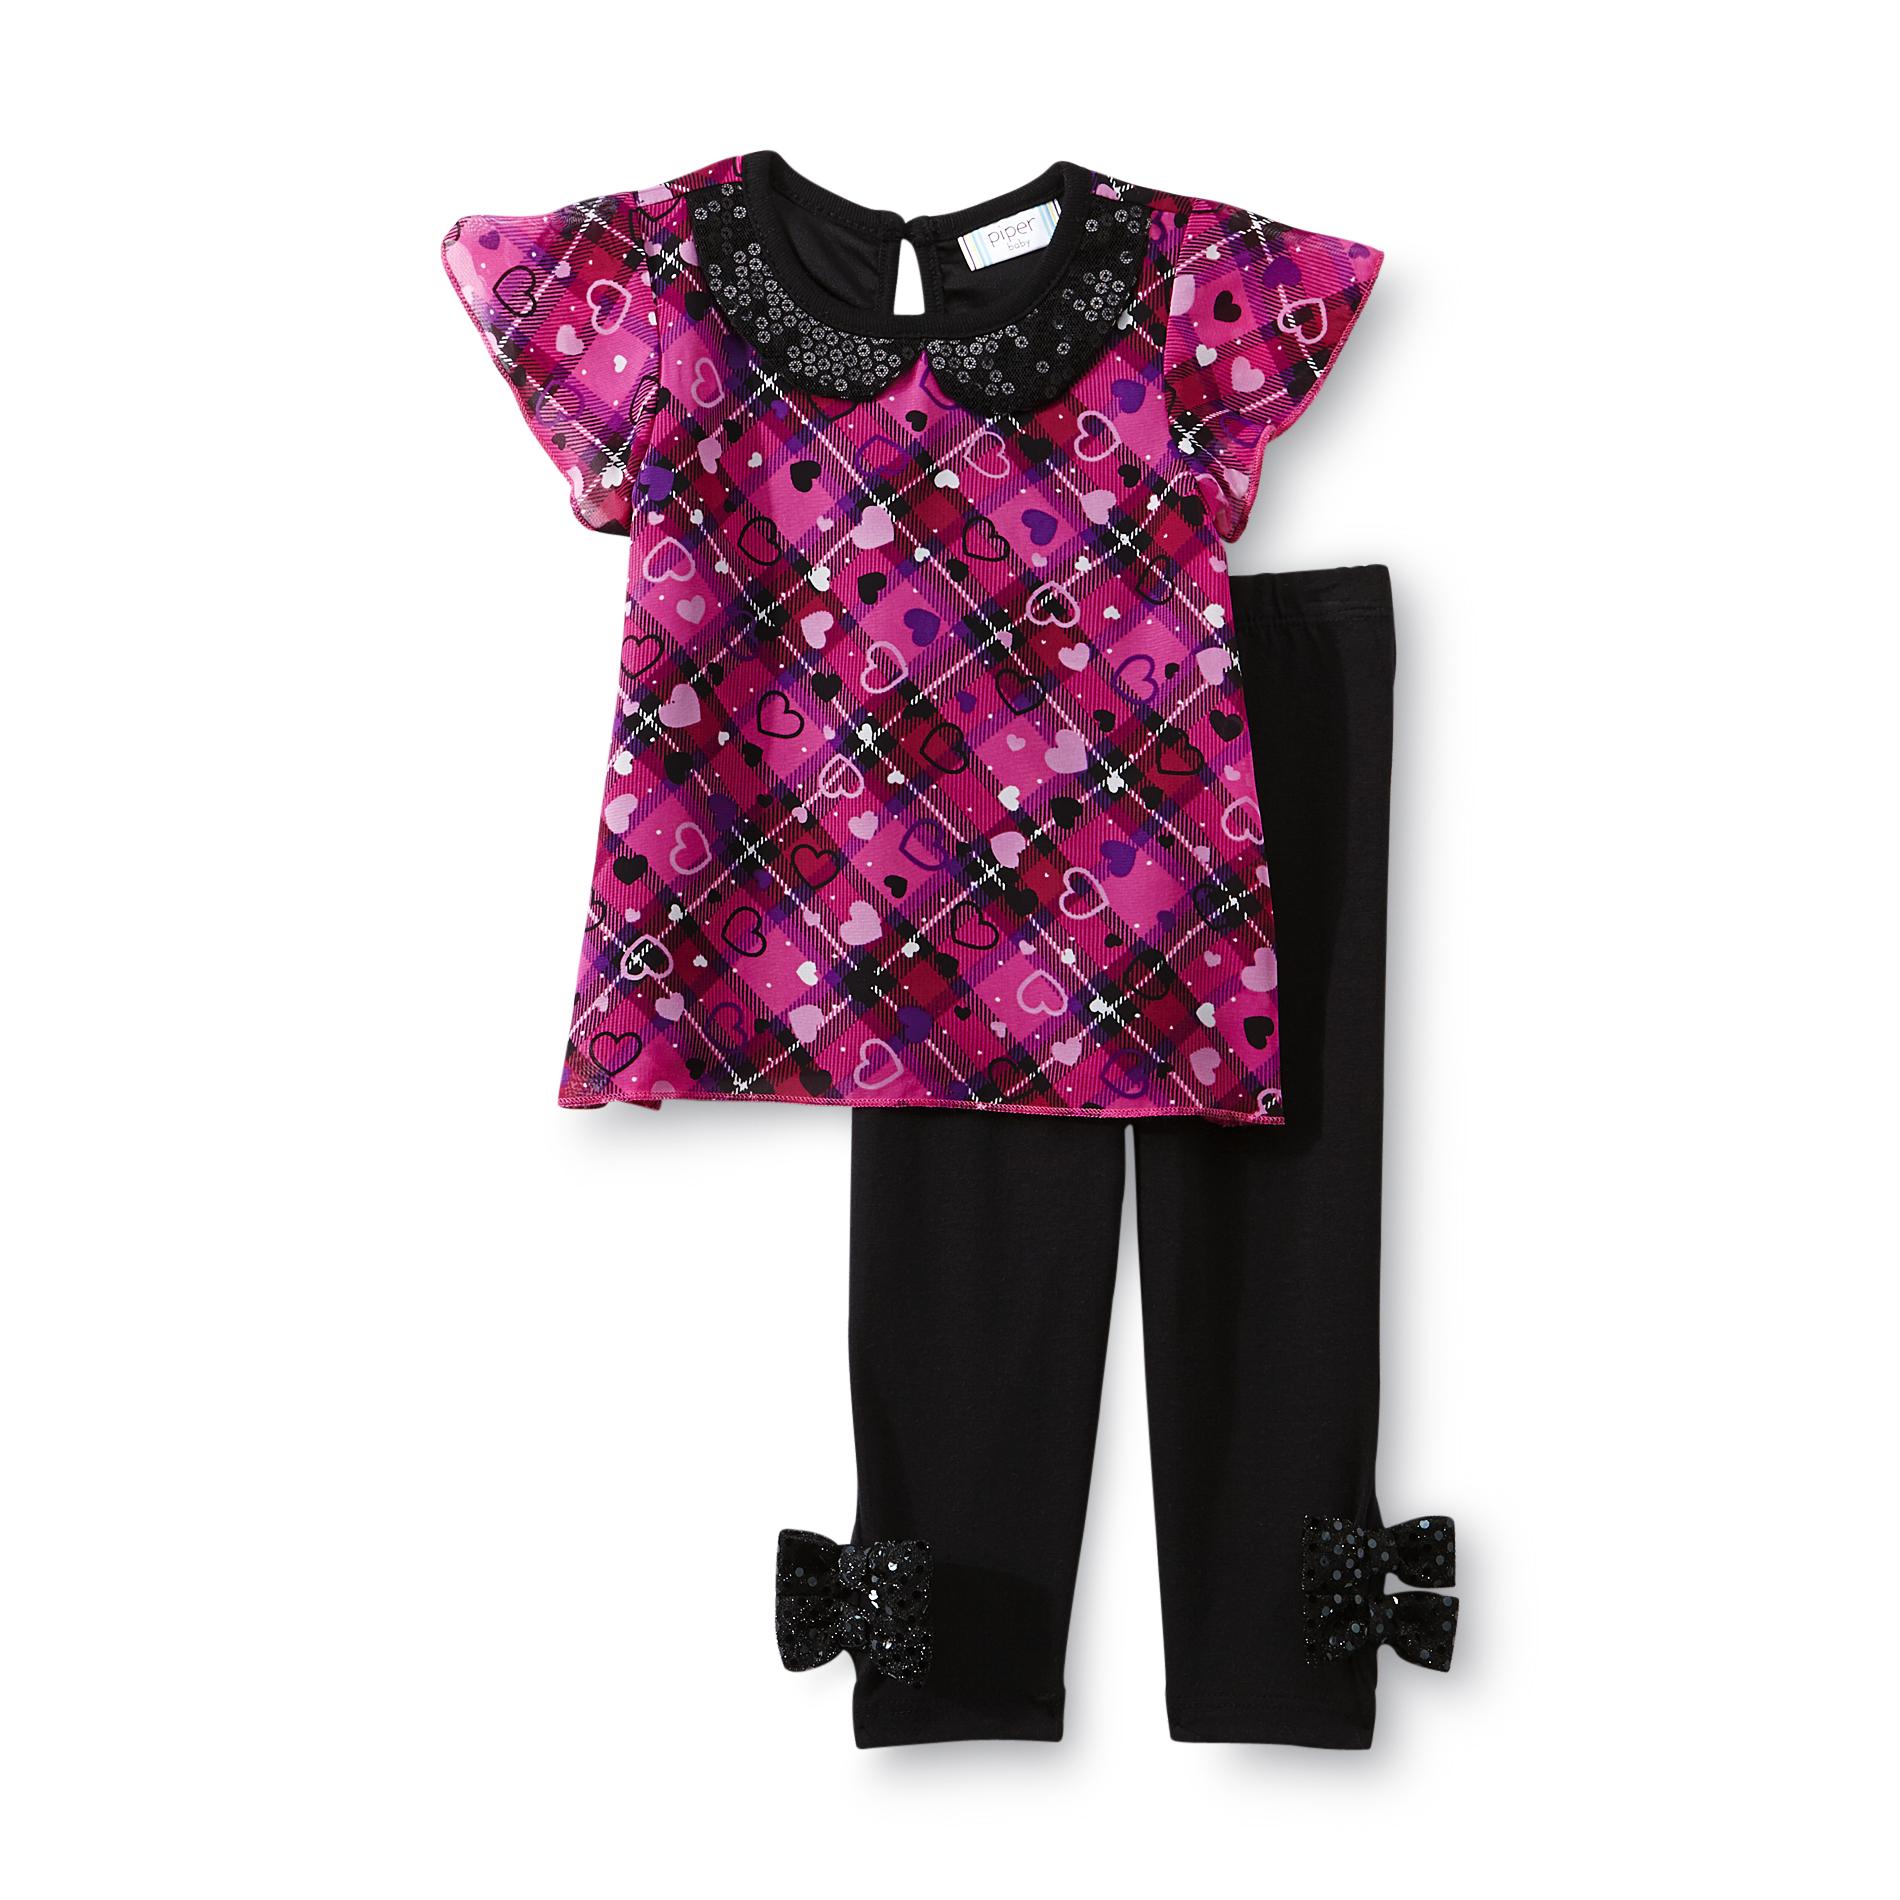 Piper Baby Infant Girl's Top & Leggings - Plaid Hearts